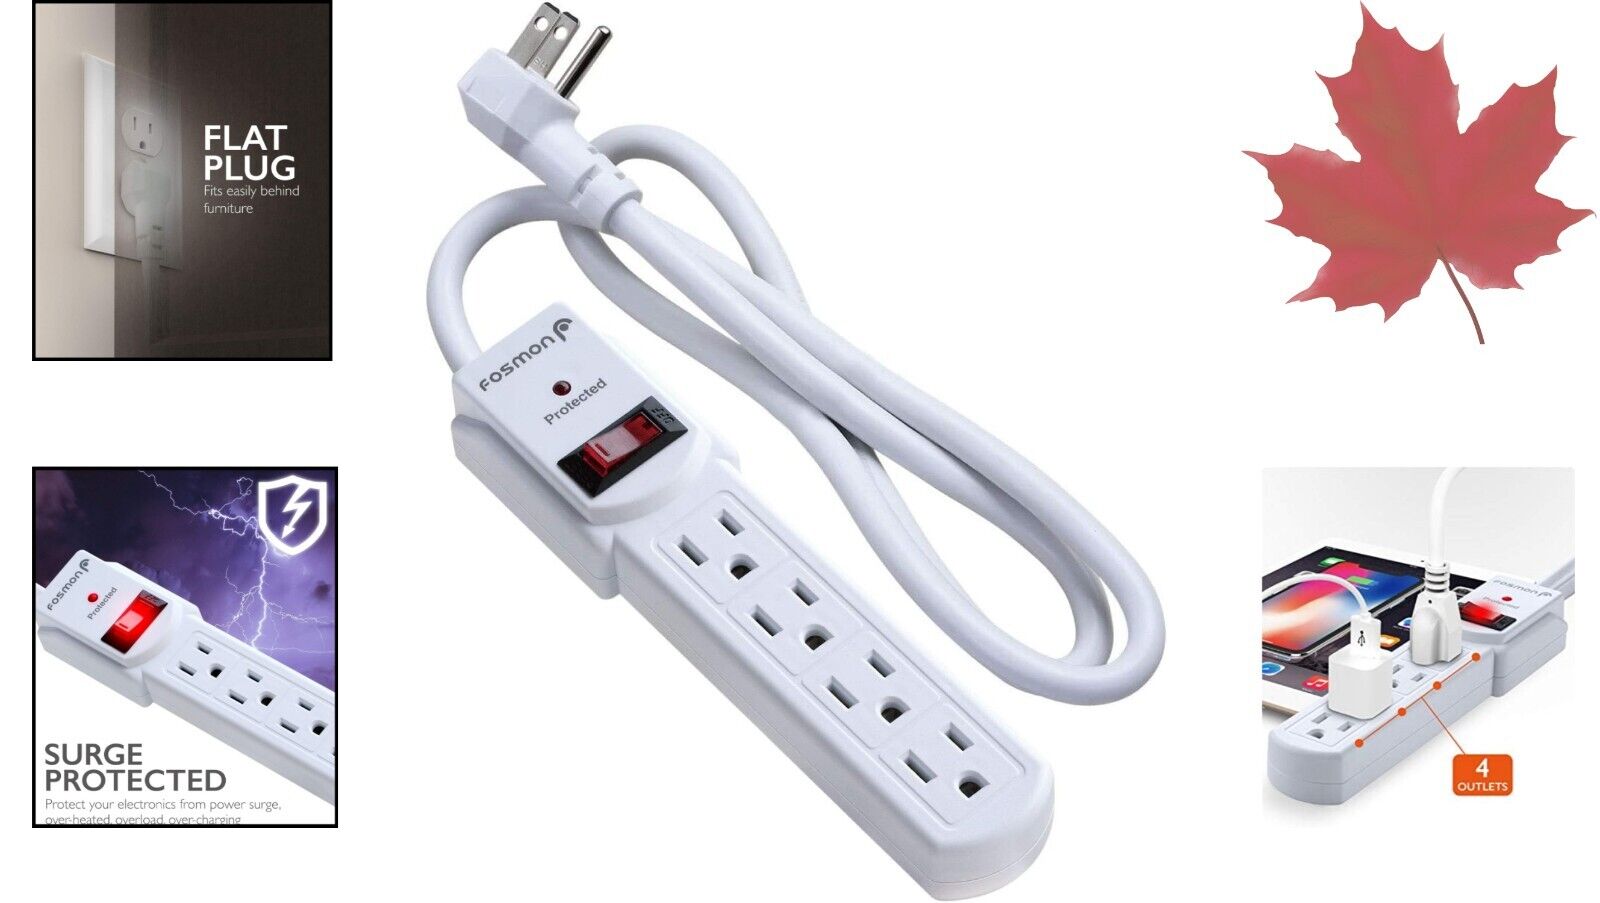 Reliable Surge Protector Power Strip - Expand Wall Outlets - LED On/Off Switch